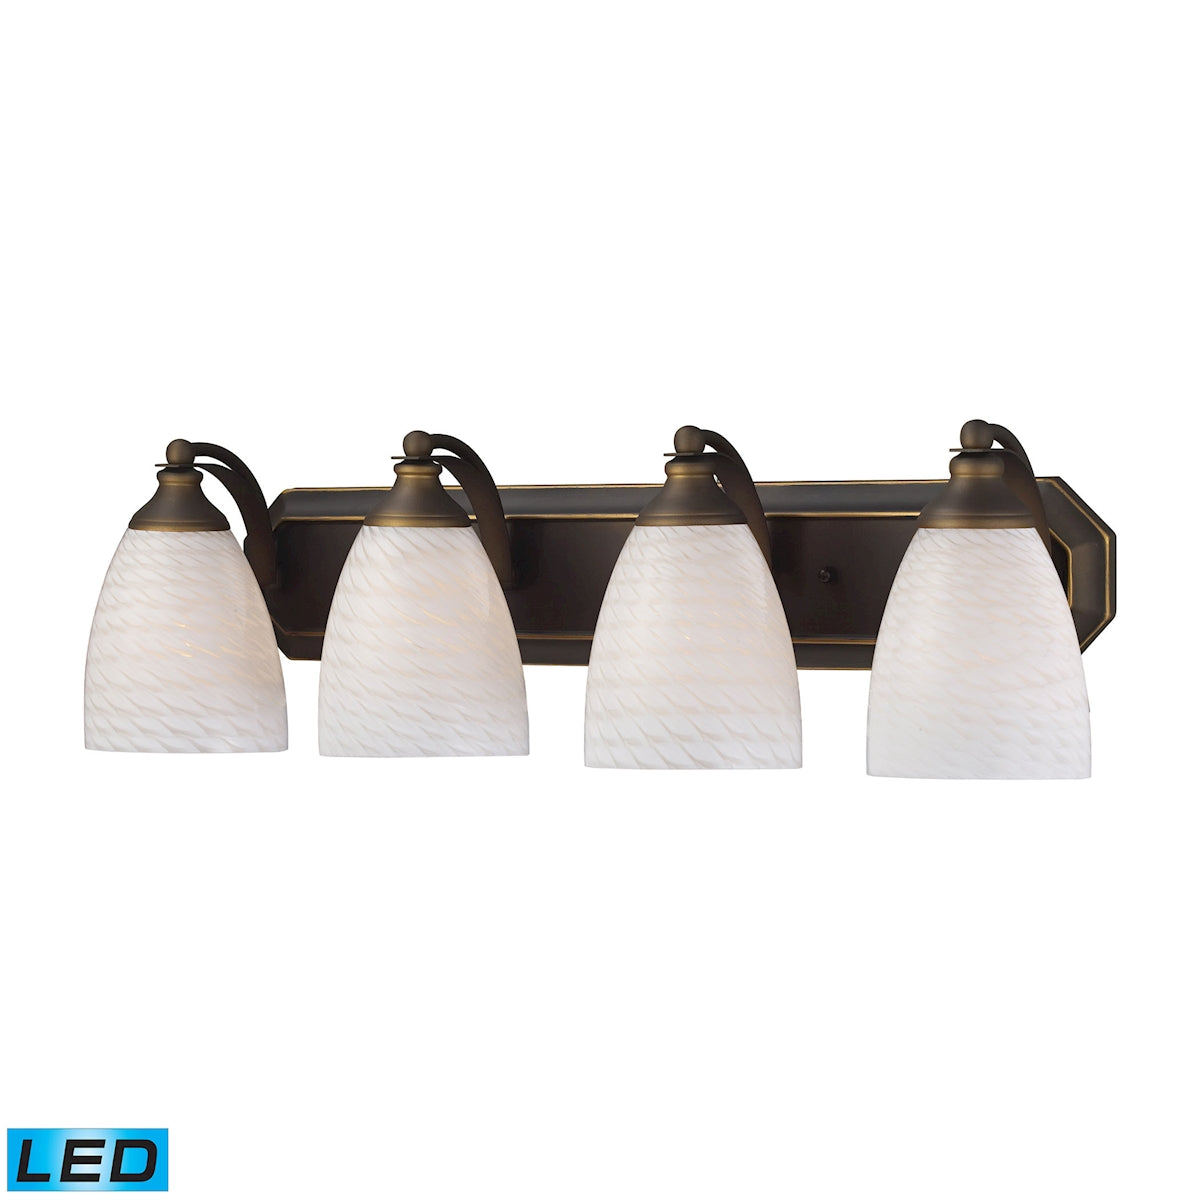 ELK Lighting 570-4B-WS-LED Mix-N-Match Vanity 4-Light Wall Lamp in Aged Bronze with White Swirl Glass - Includes LED Bulbs